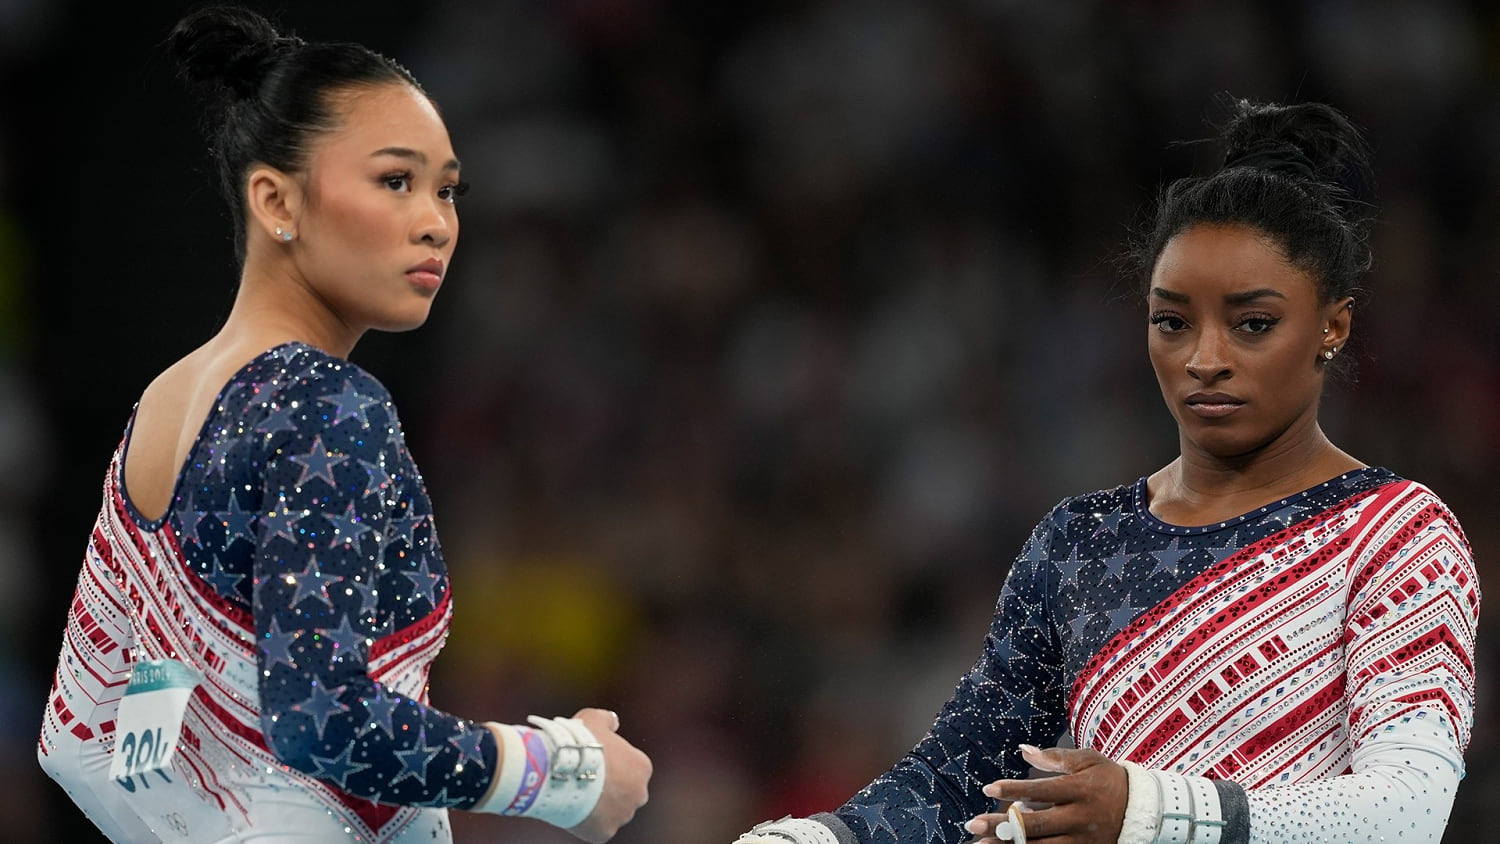 What to watch for as gymnasts Simone Biles and Suni Lee face off